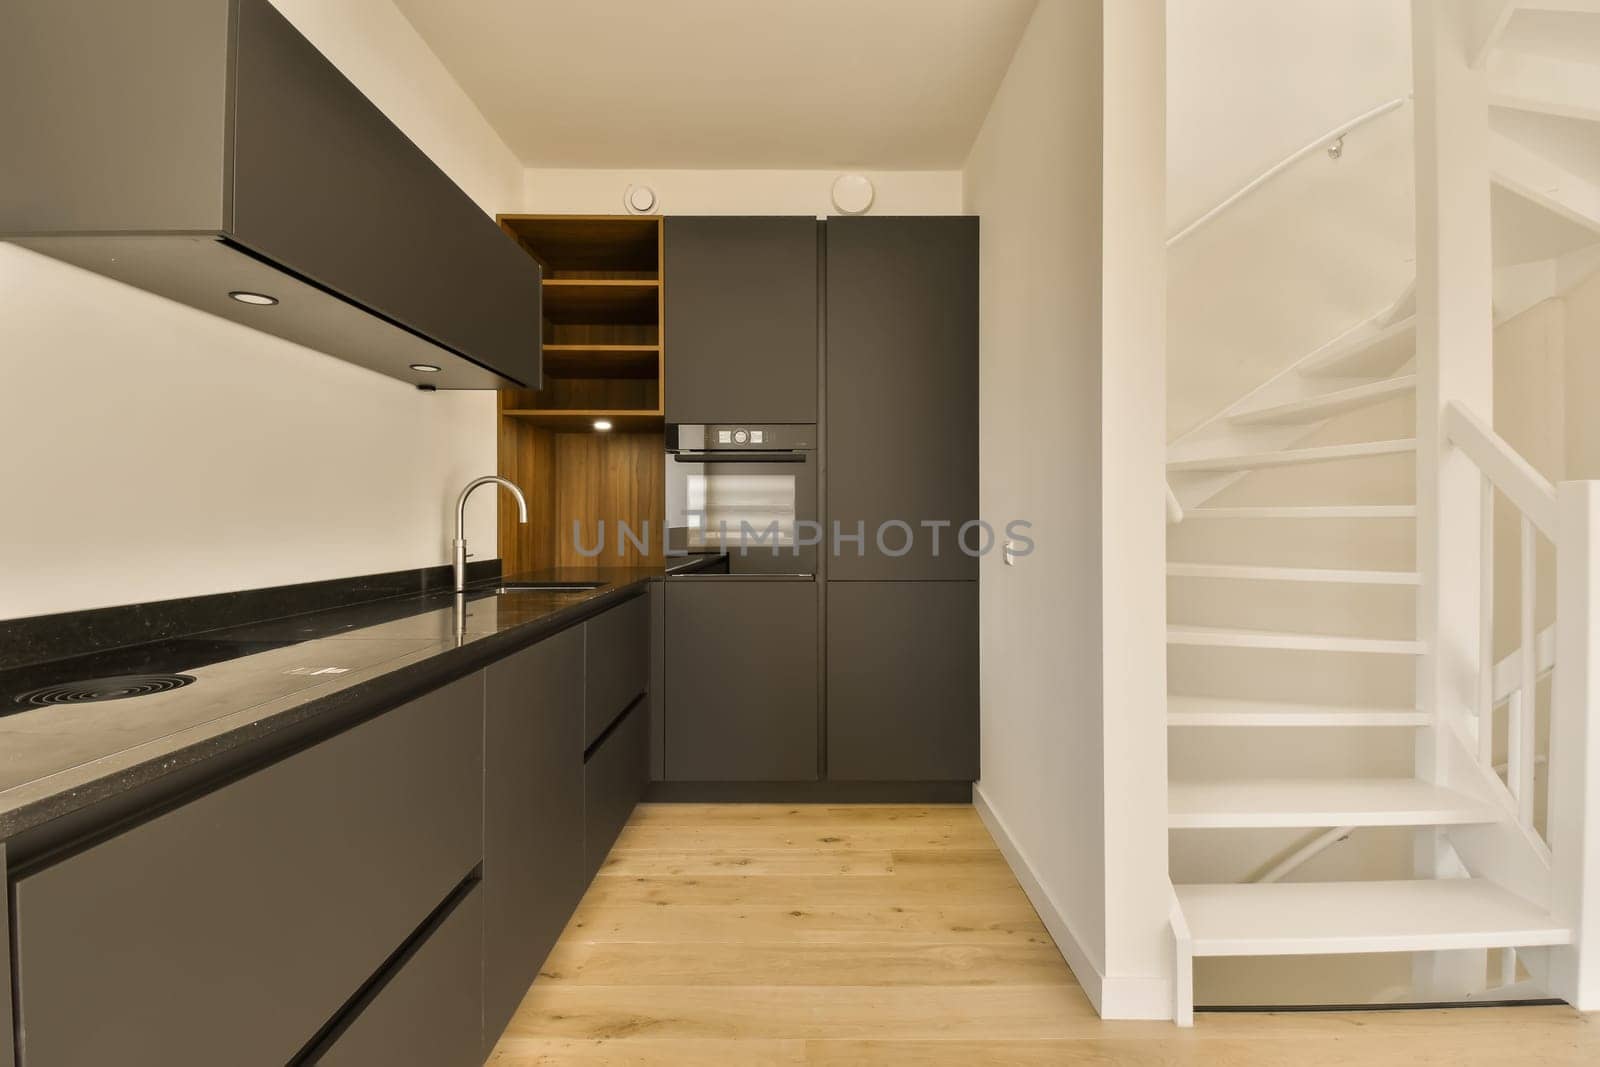 a modern kitchen and staircase in a house with white walls, wood flooring and dark grey cabinetd cupboards